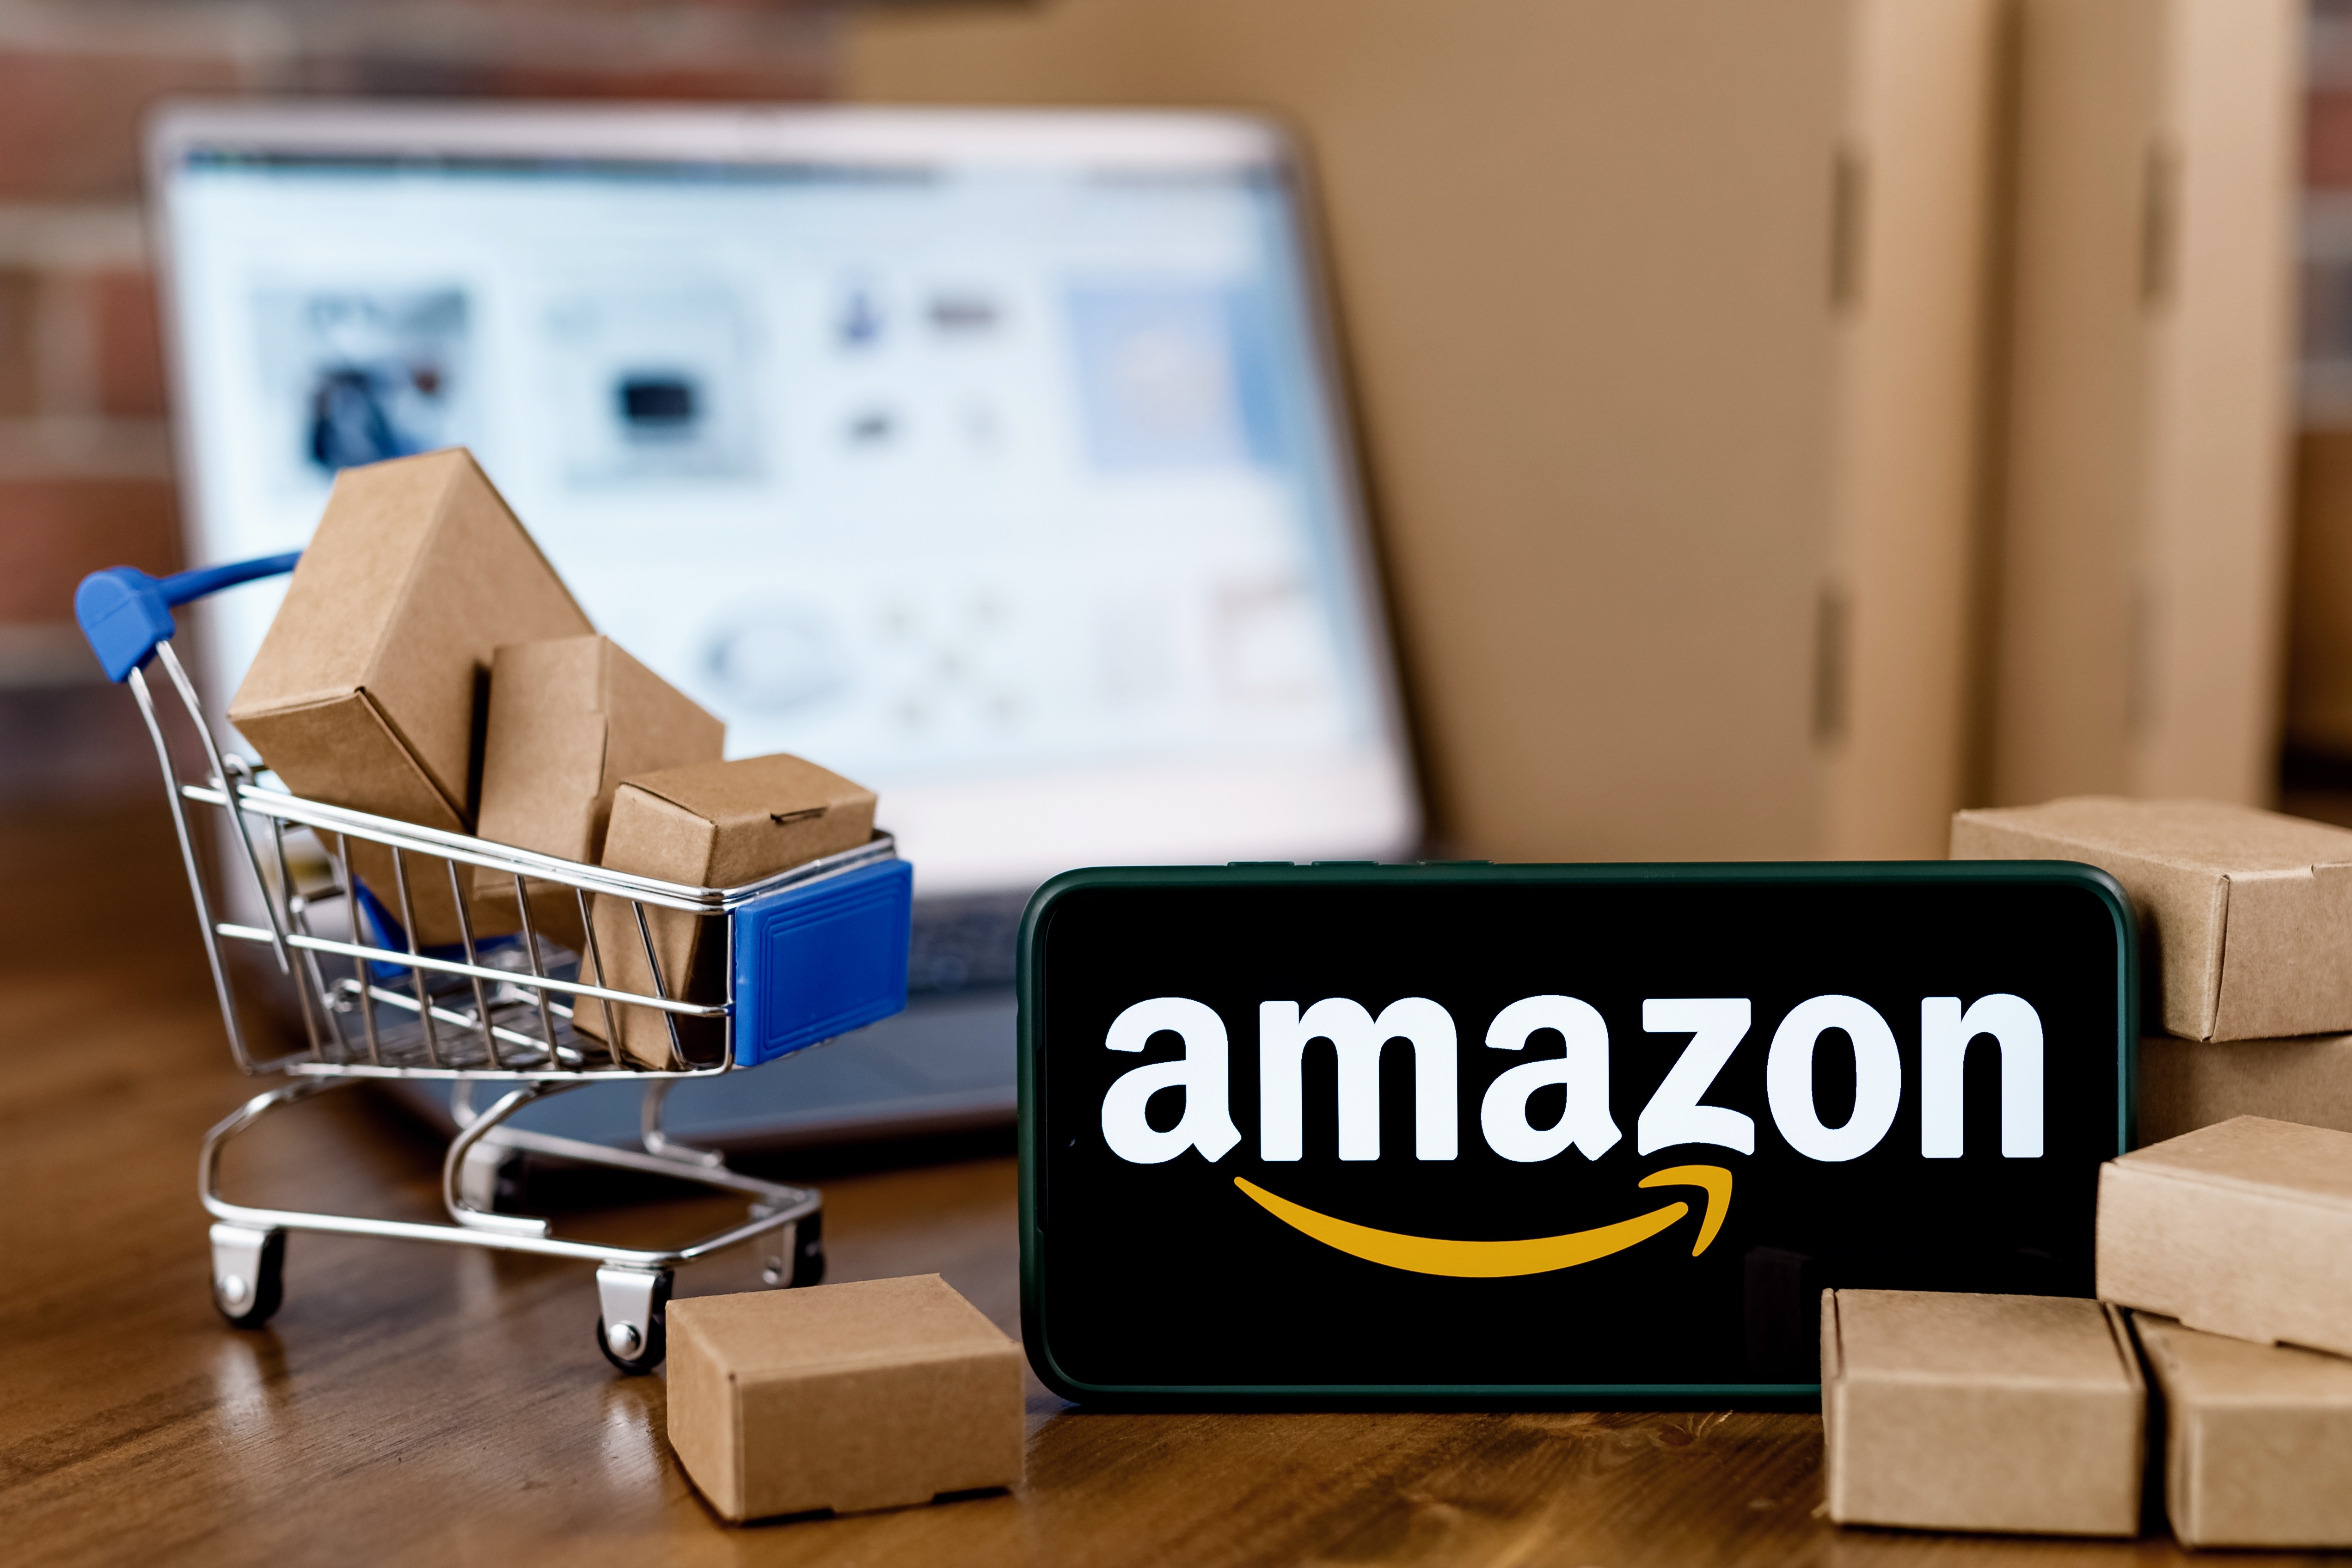 Amazon Announced 2nd Deals Event For 2022 As Customers Face 'Macroeconomic' Challenges